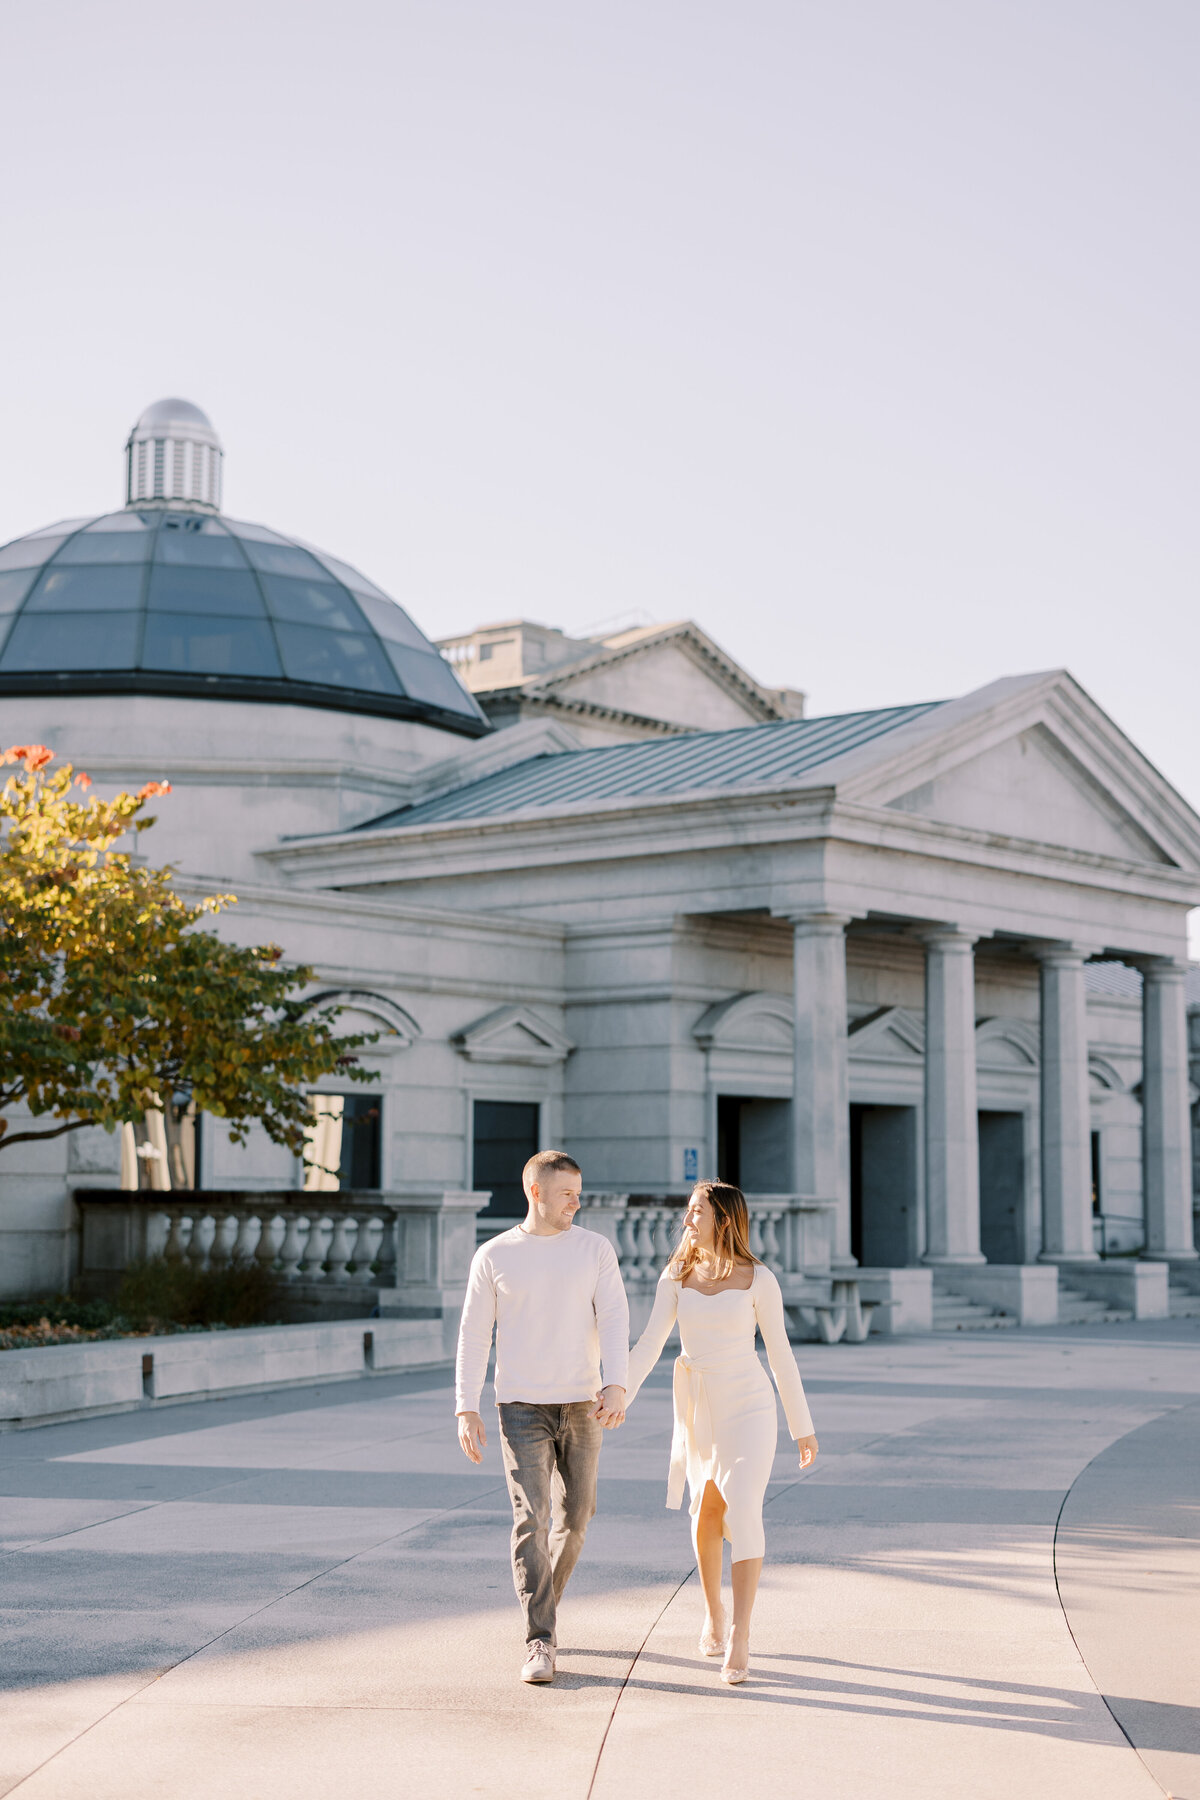 Capitol Building Engagement Session in Harrisburg, PA